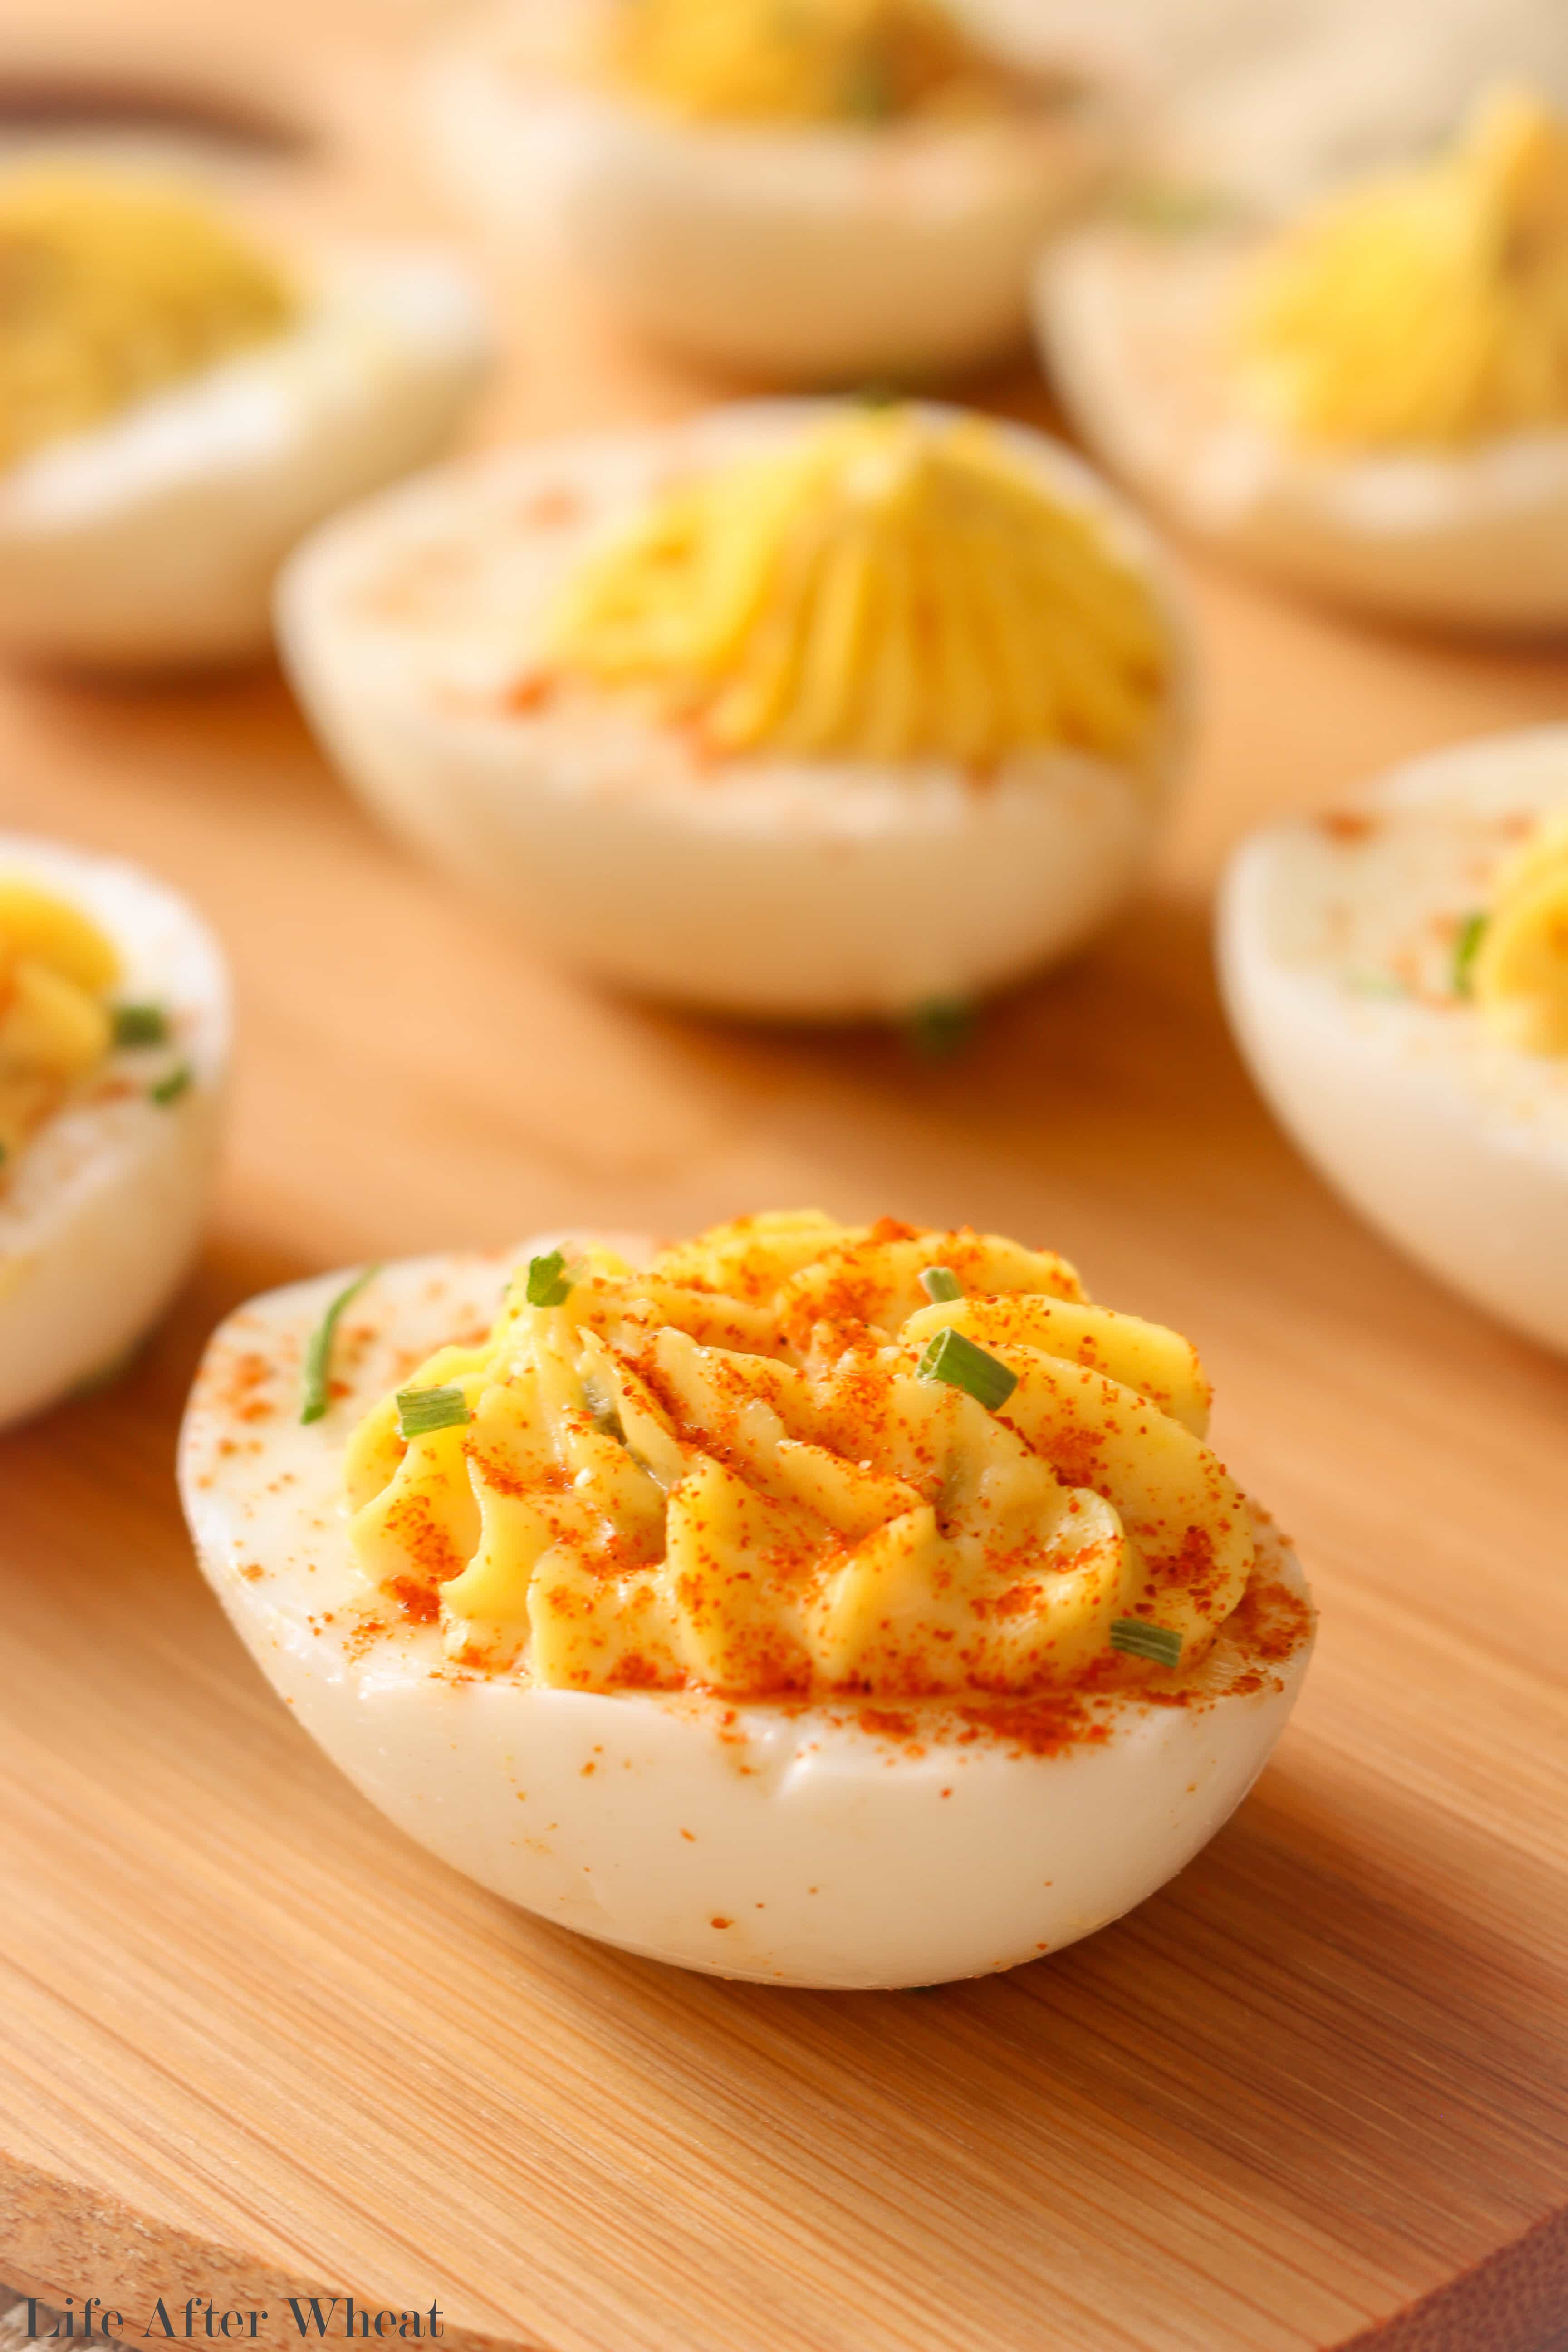 Gluten Free Deviled Eggs Recipe - Life After Wheat